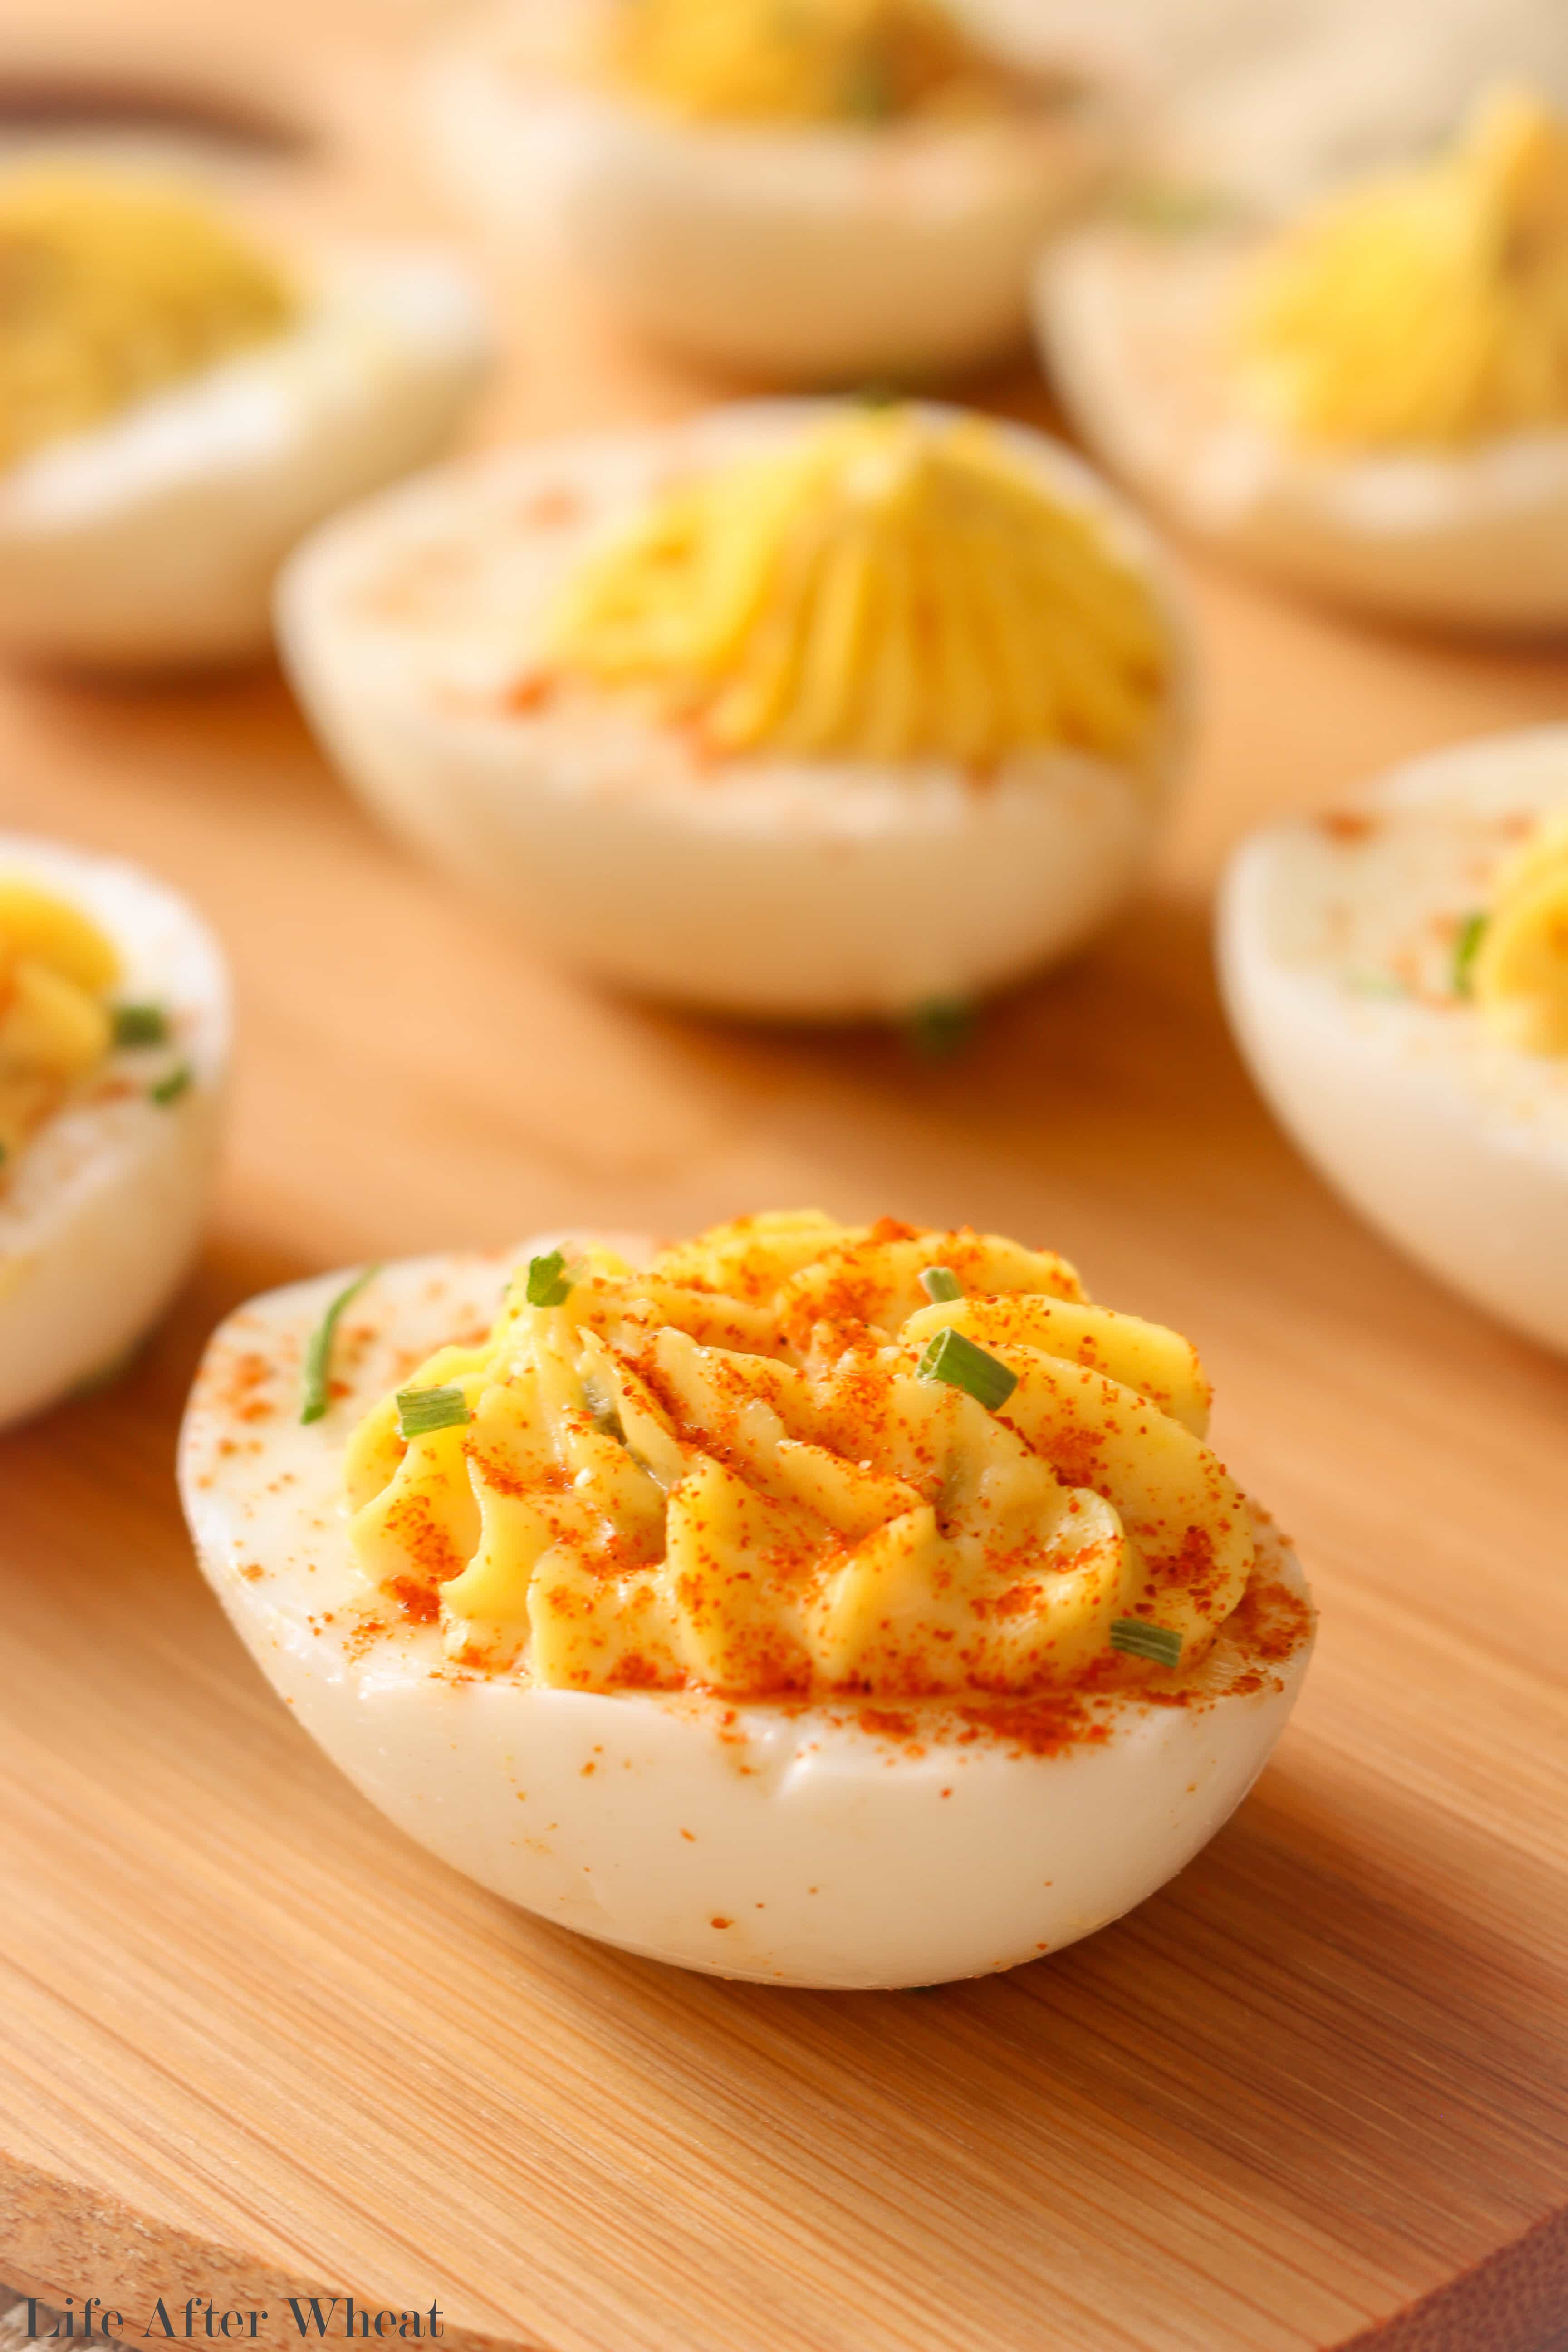 Gluten Free Deviled Eggs Recipe - Life After Wheat